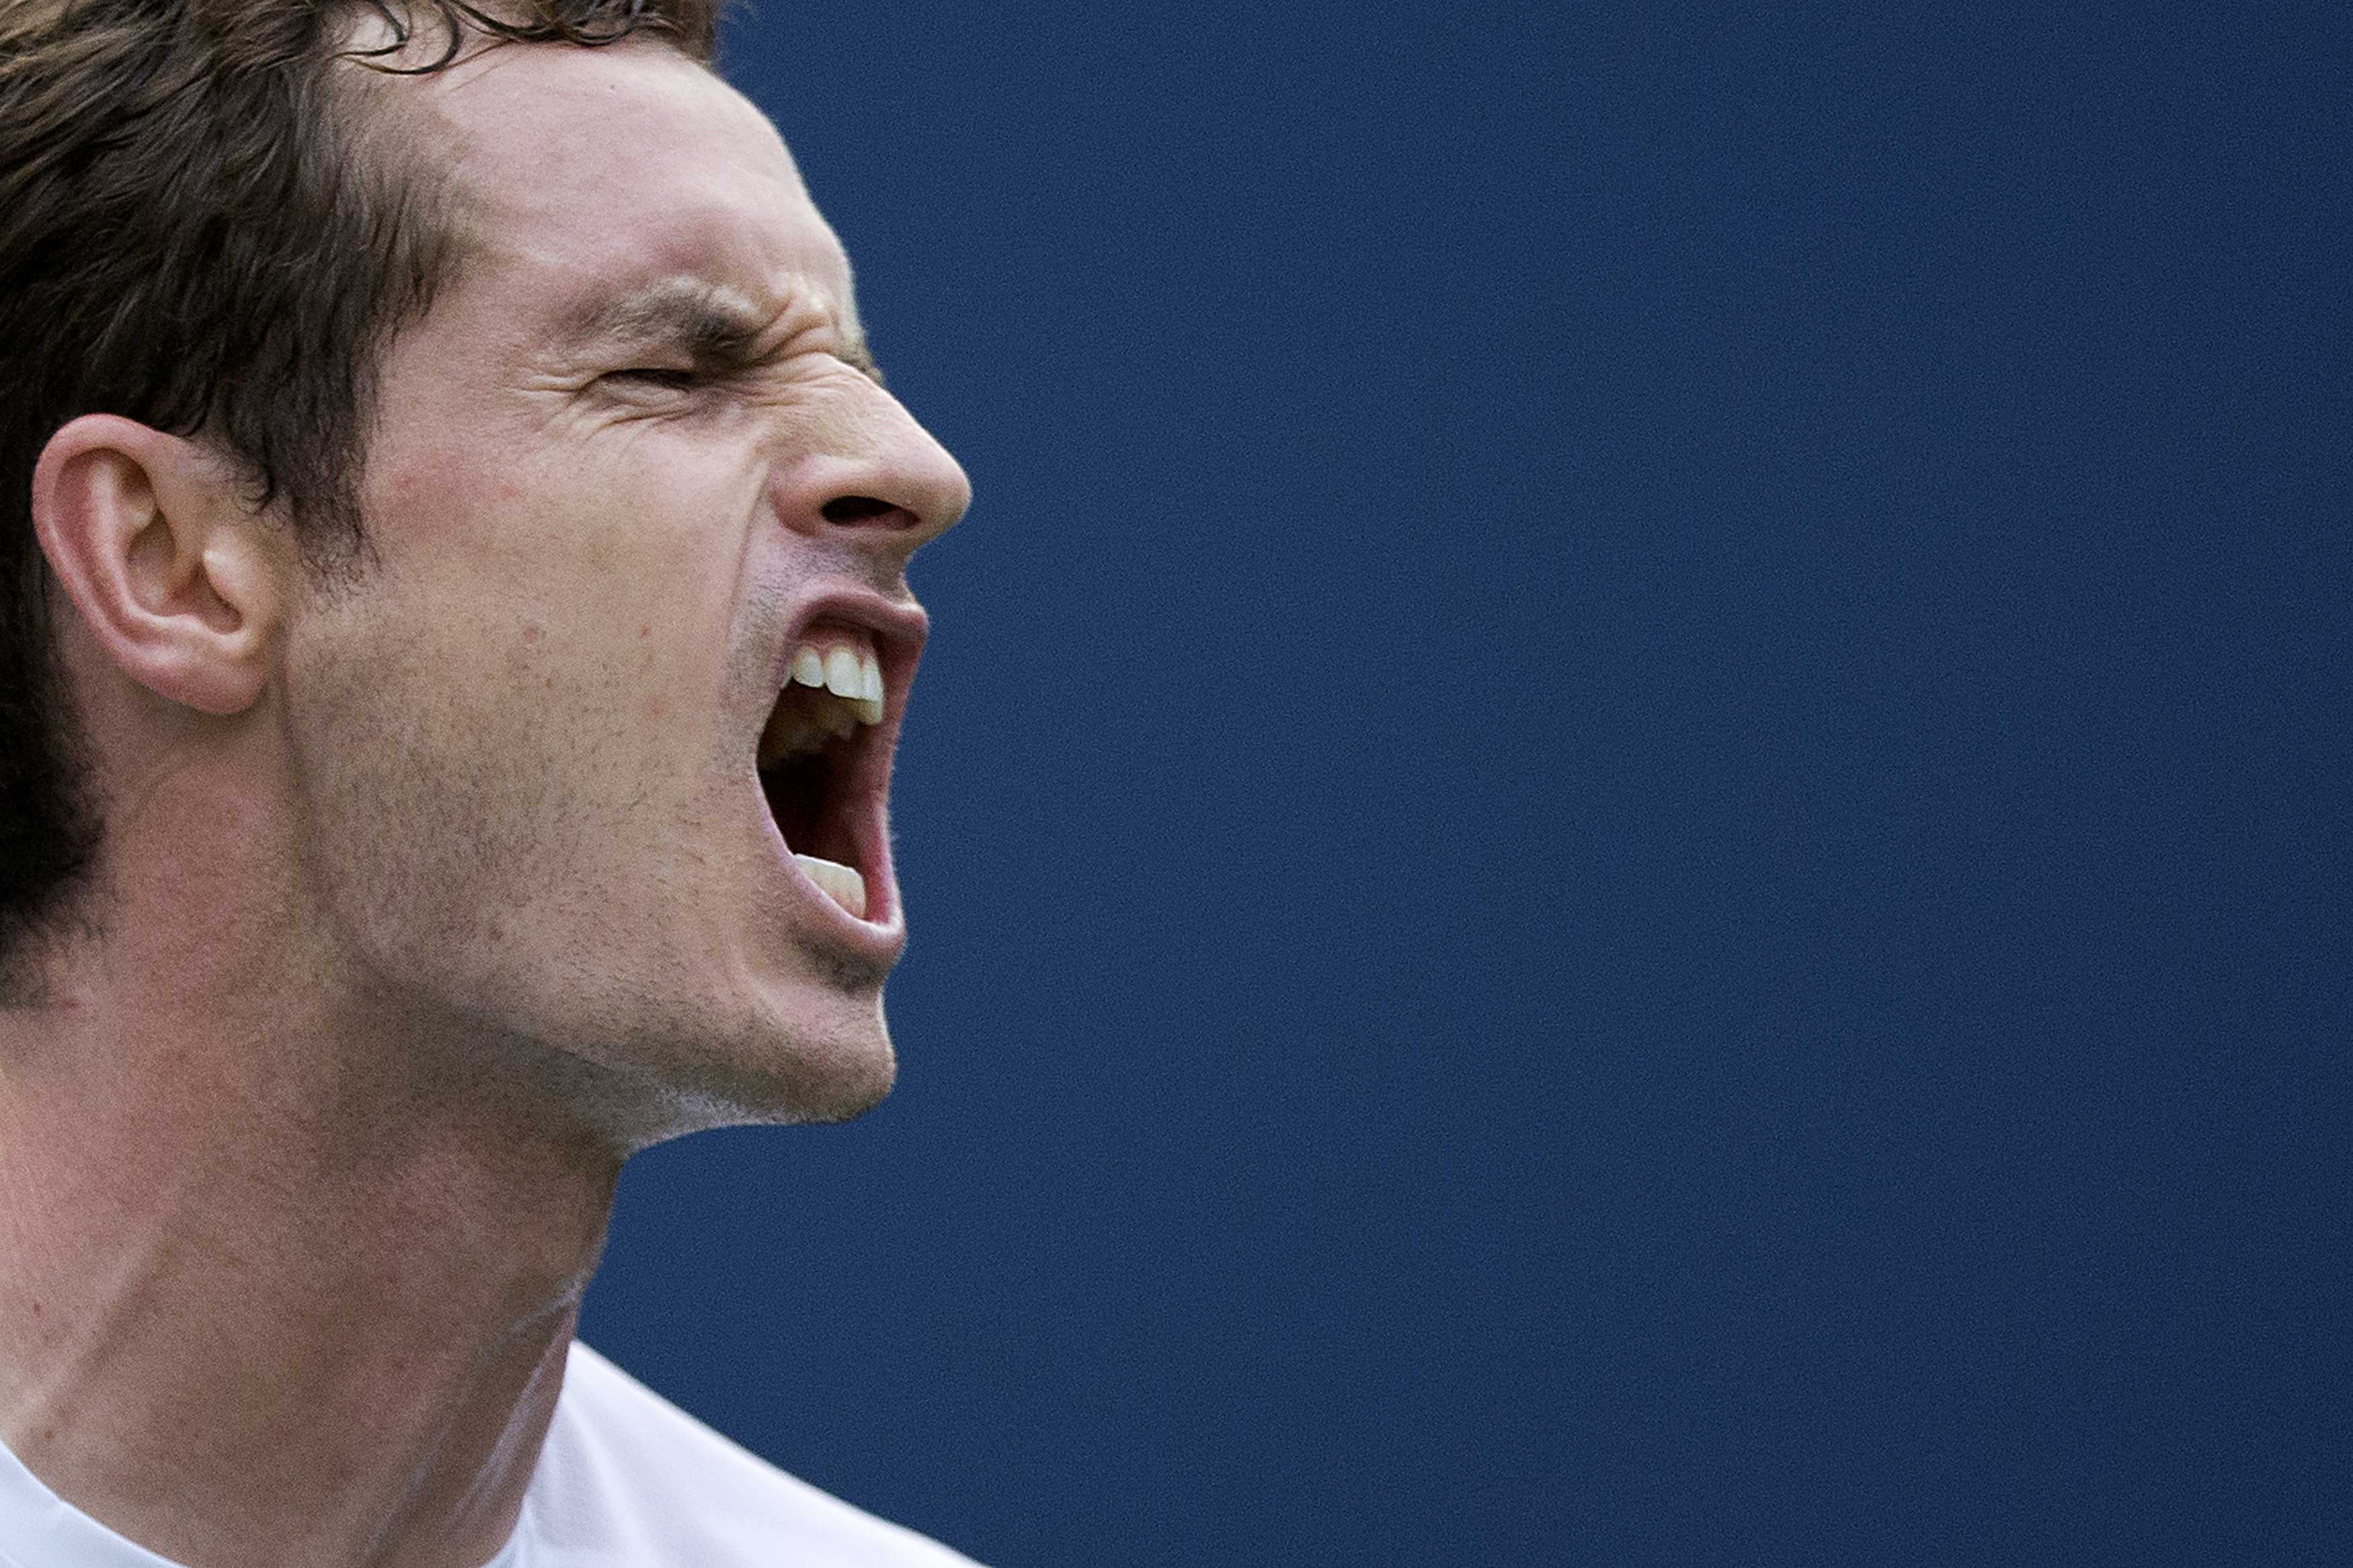 Andy Murray lets out a roar after winning a point against Adrian Mannarino. Photo: Reuters